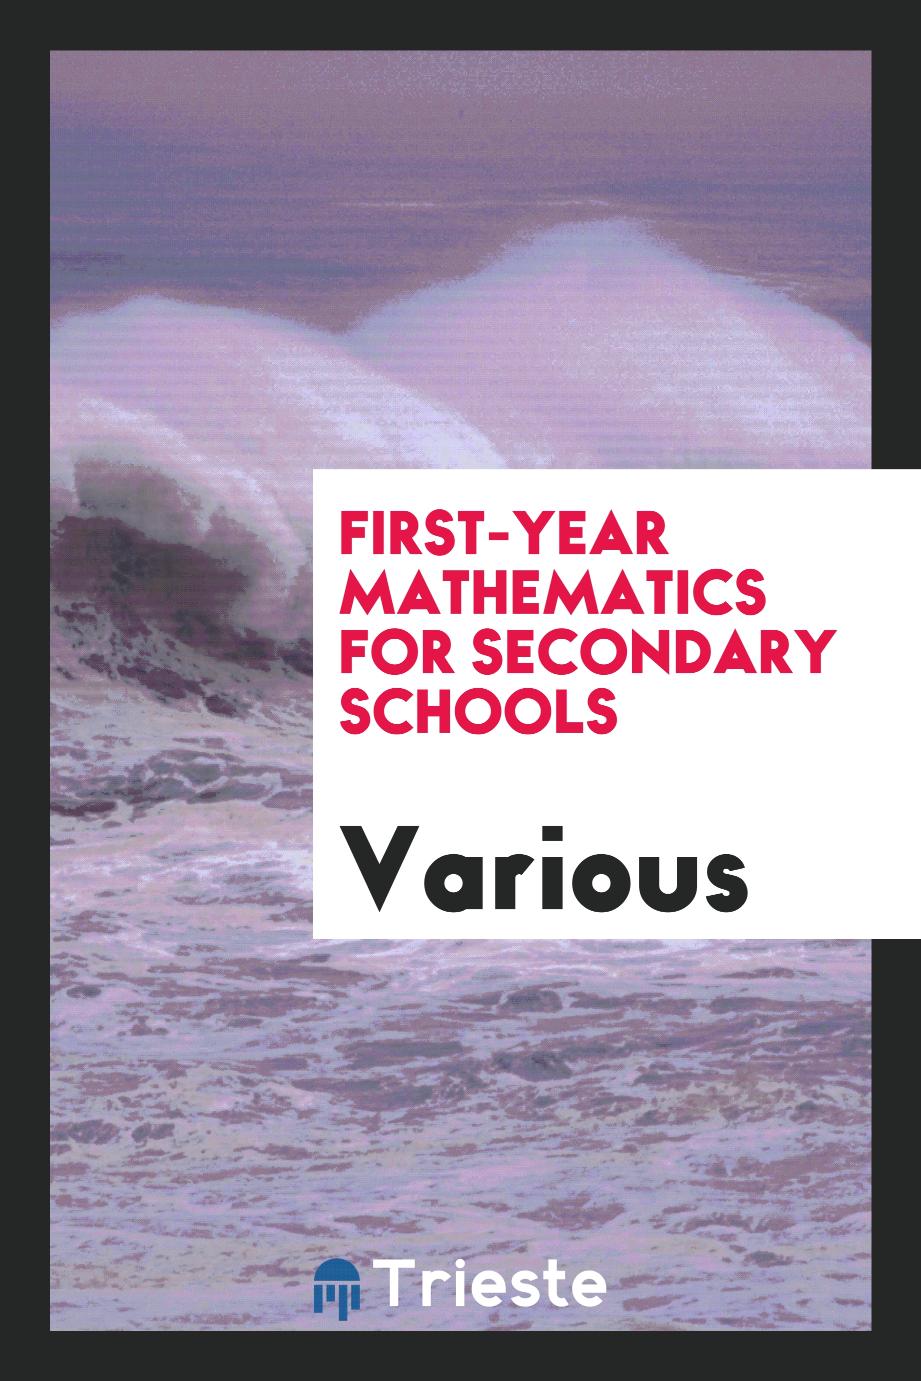 First-year mathematics for secondary schools